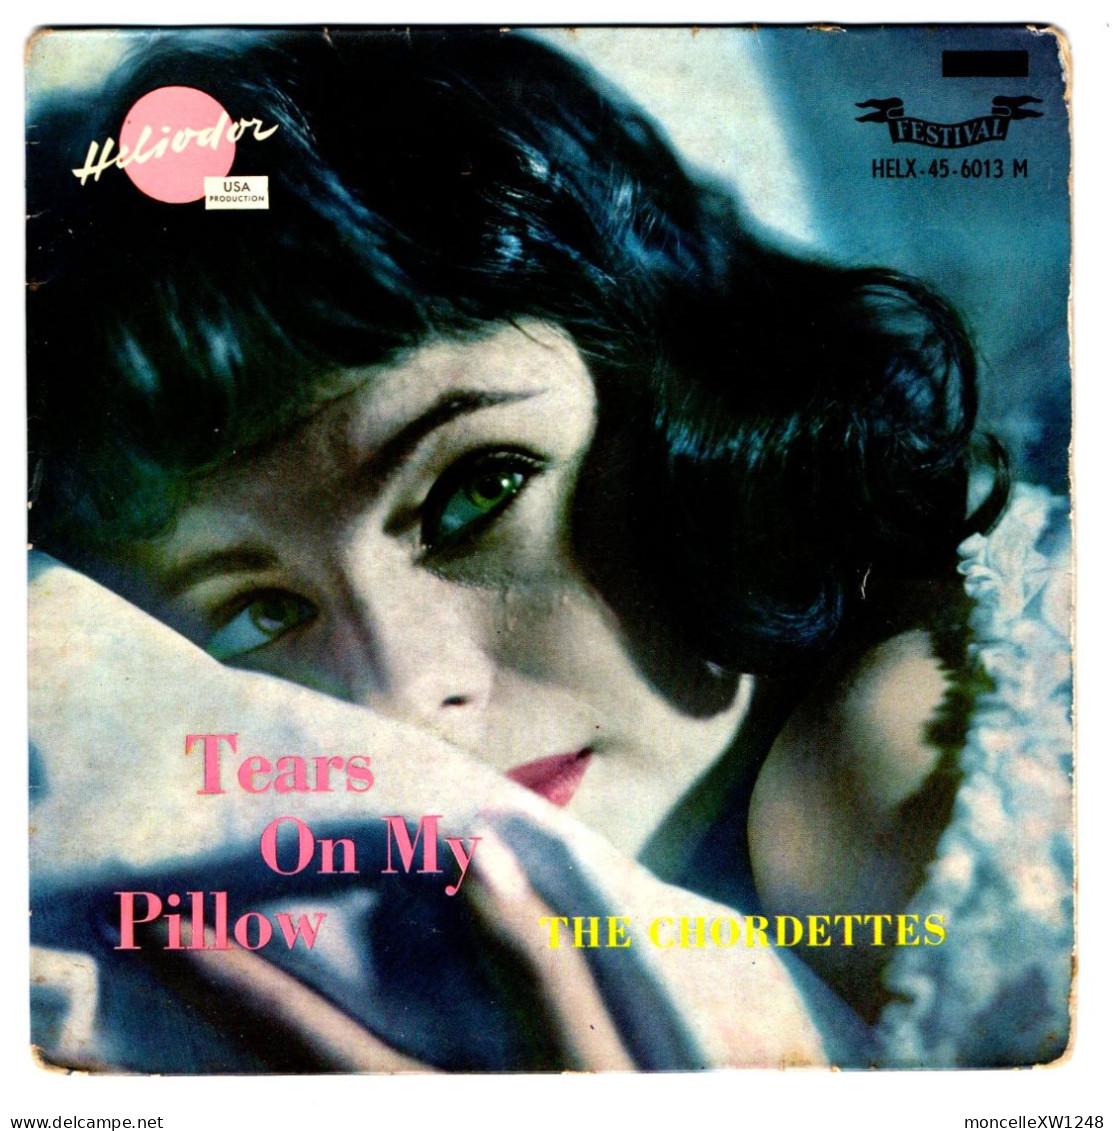 The Chordettes - 45 T EP Tears On My Pillow (1959) - 45 T - Maxi-Single